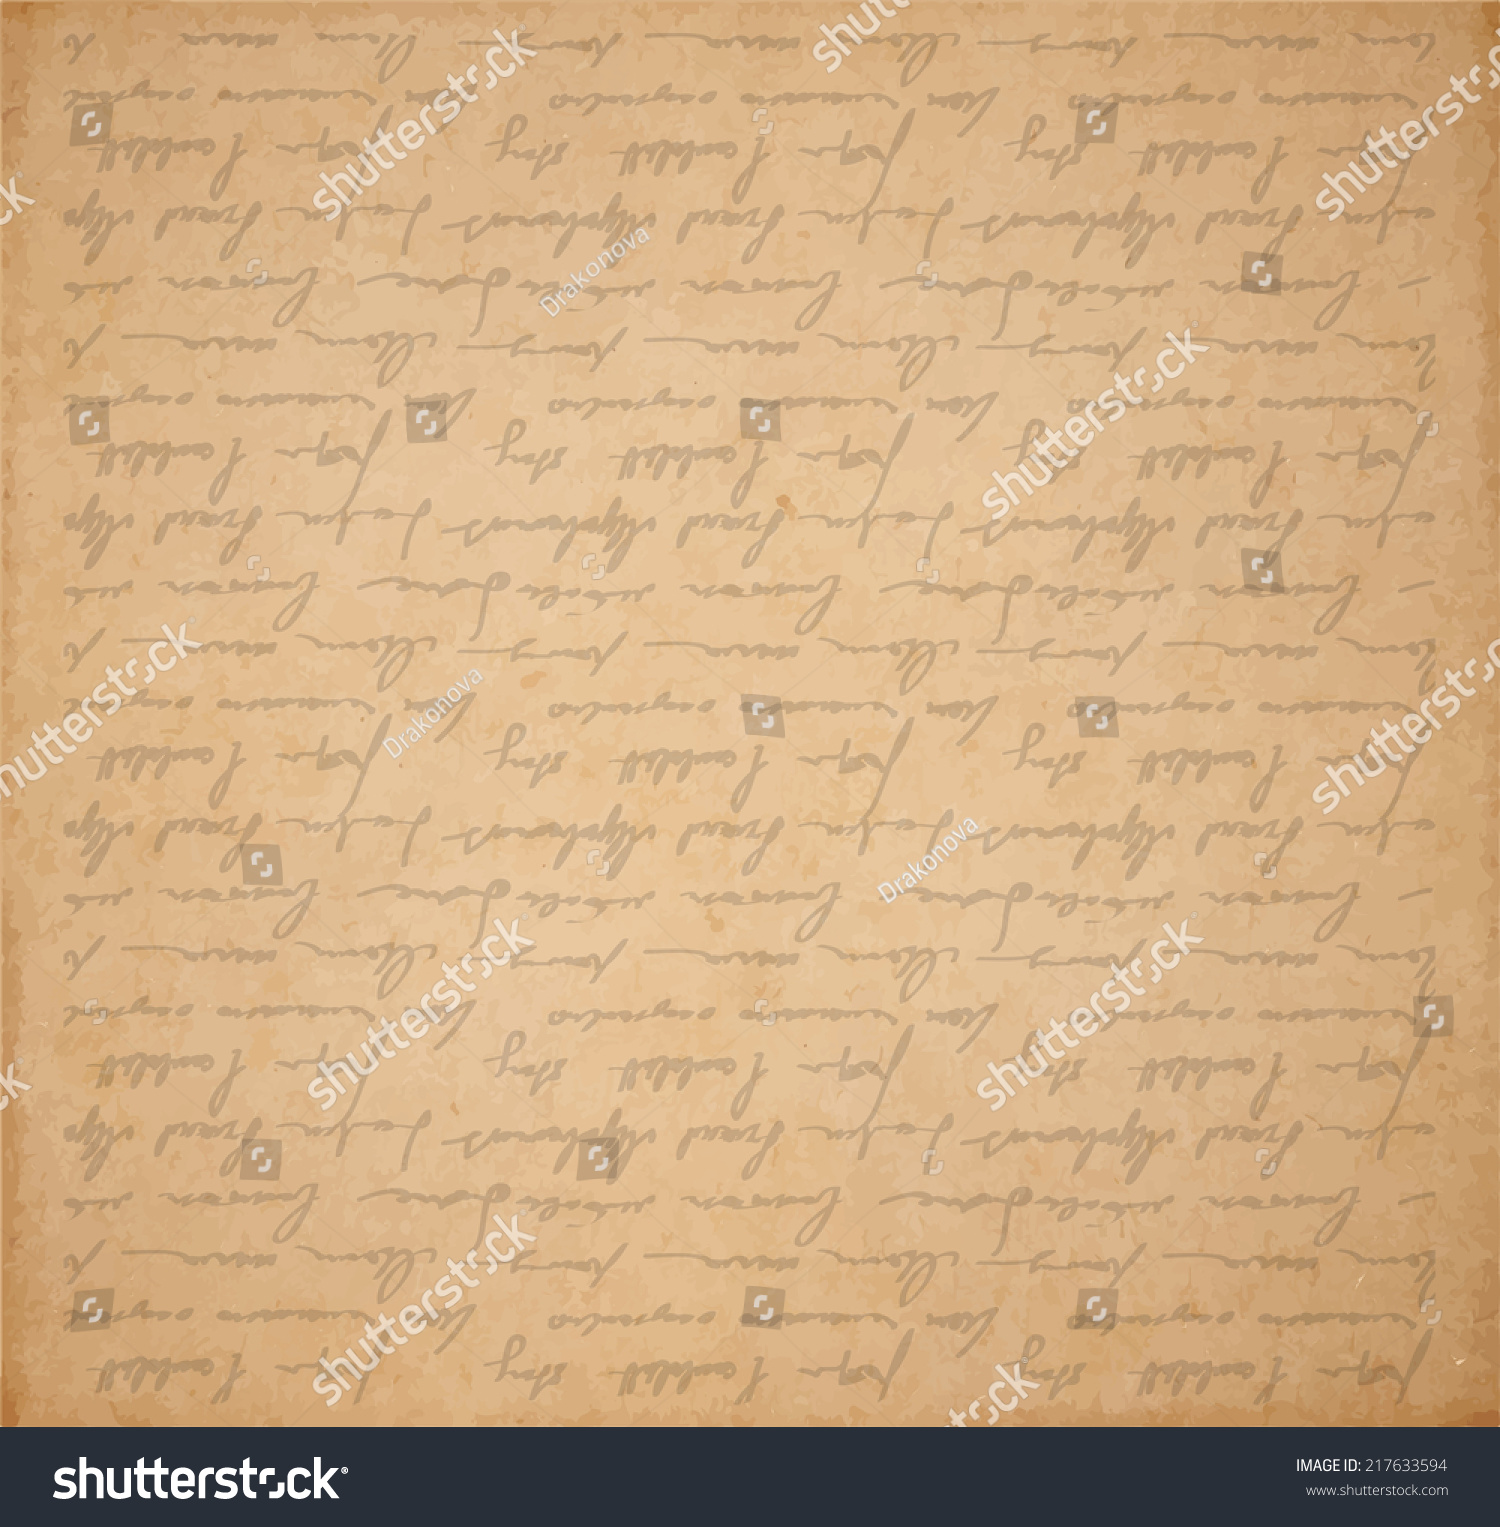 Vintage Old Paper Texture Handwriting Letter Stock Vector